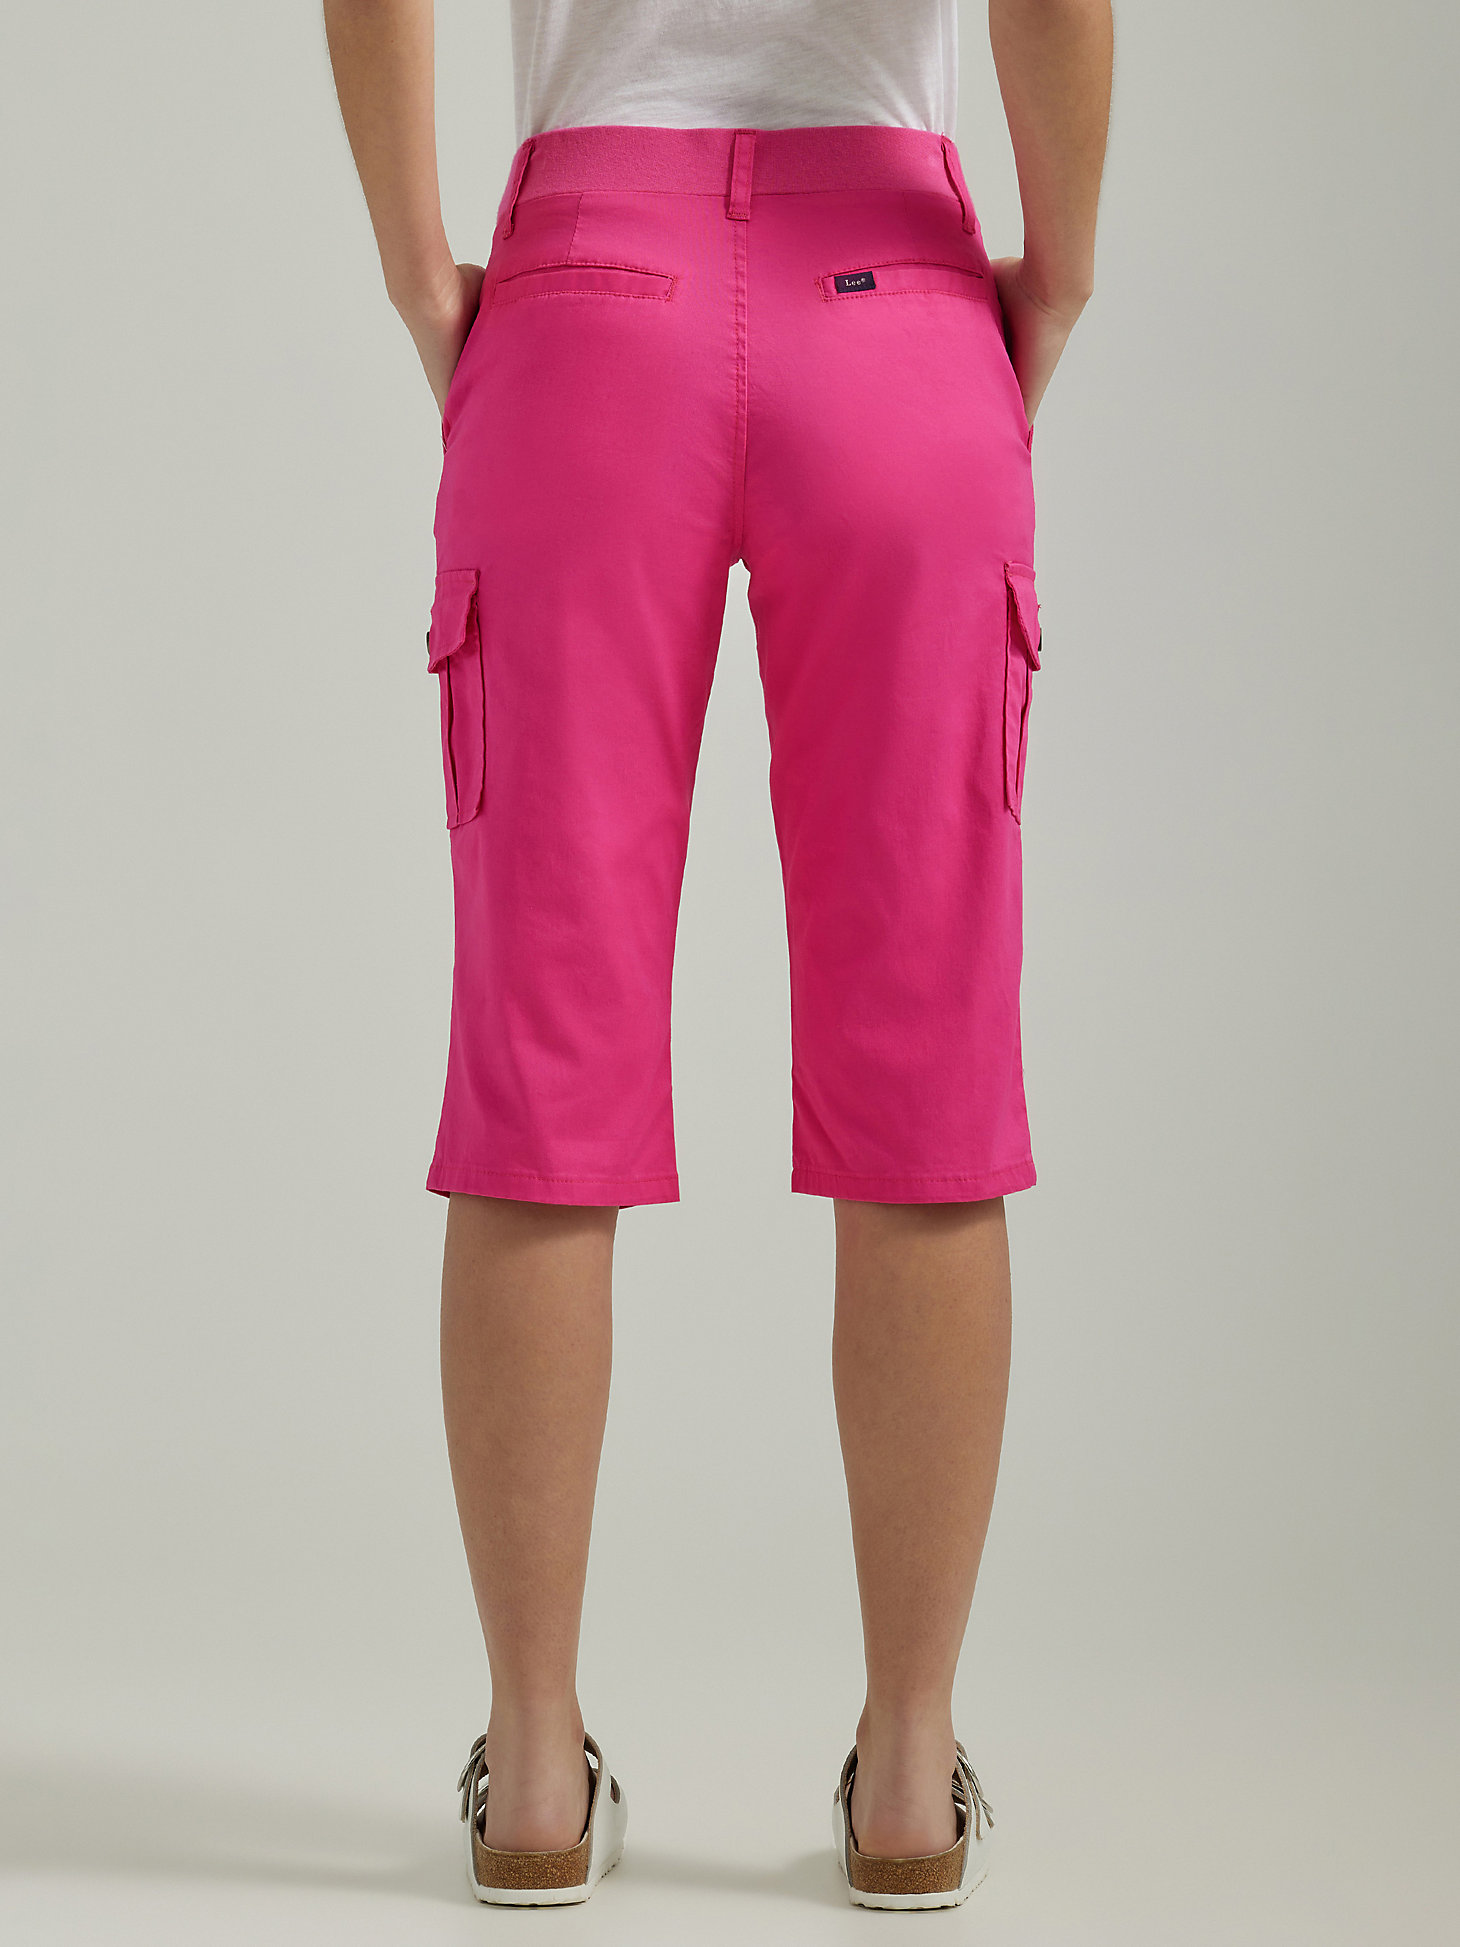 Women's Ultra Lux with Flex-to-Go Relaxed Cargo Skimmer in Roxie Pink alternative view 1